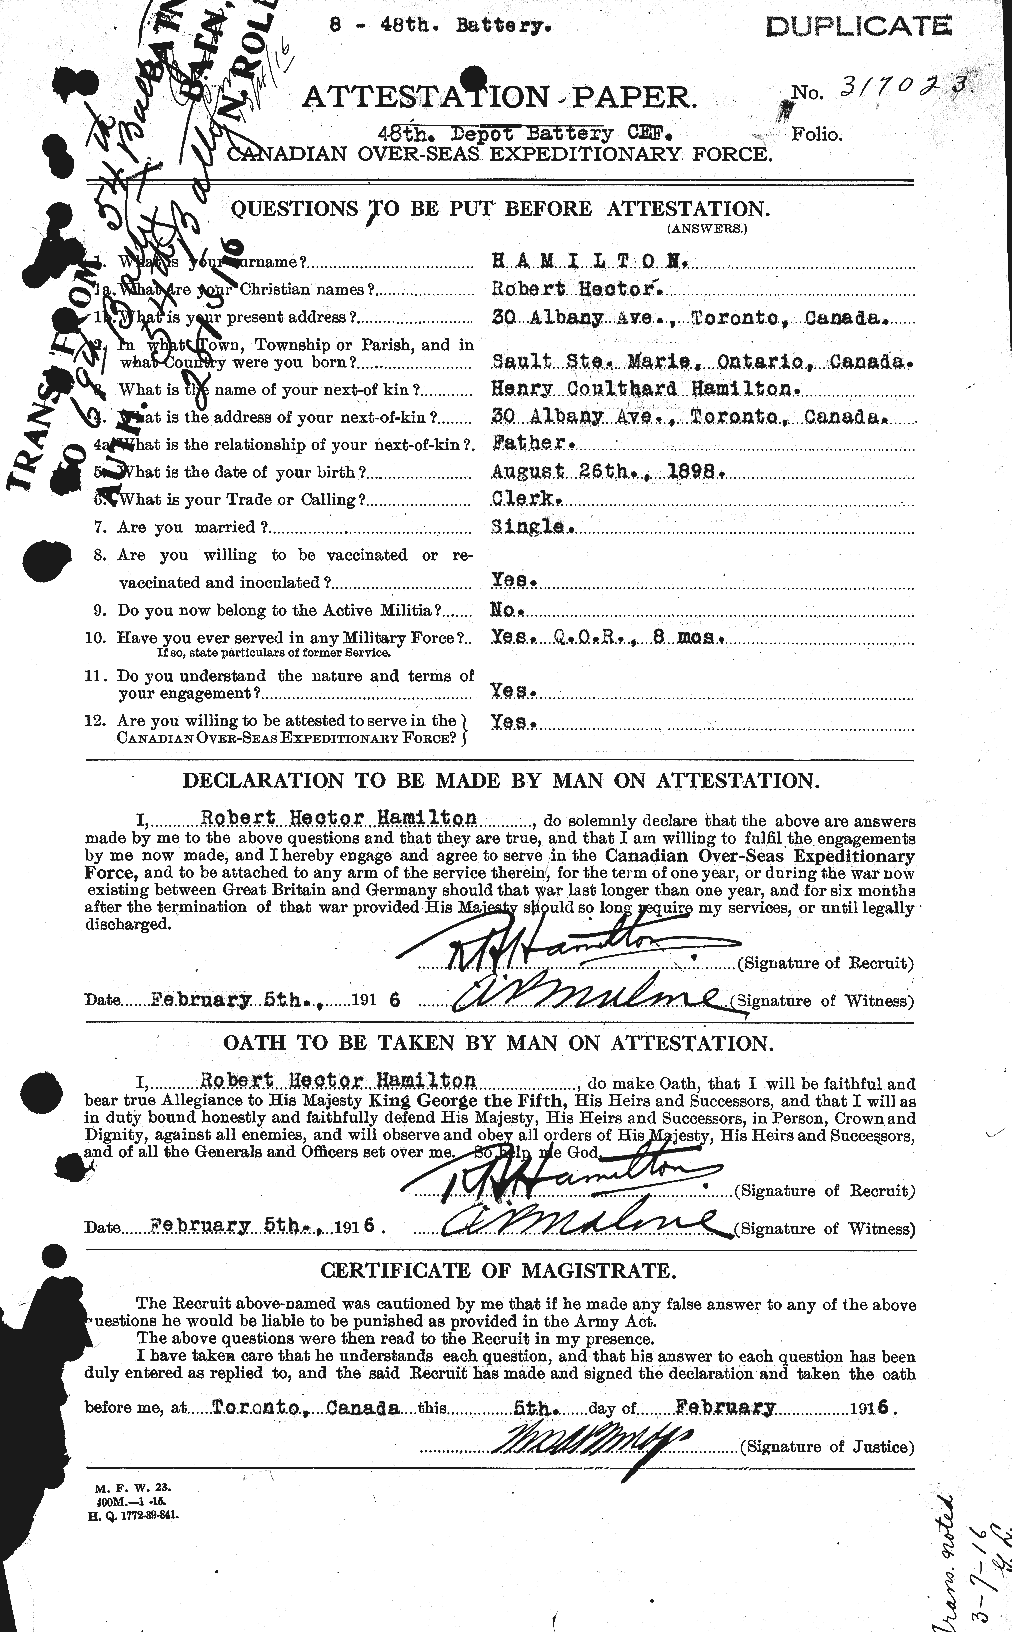 Personnel Records of the First World War - CEF 373259a